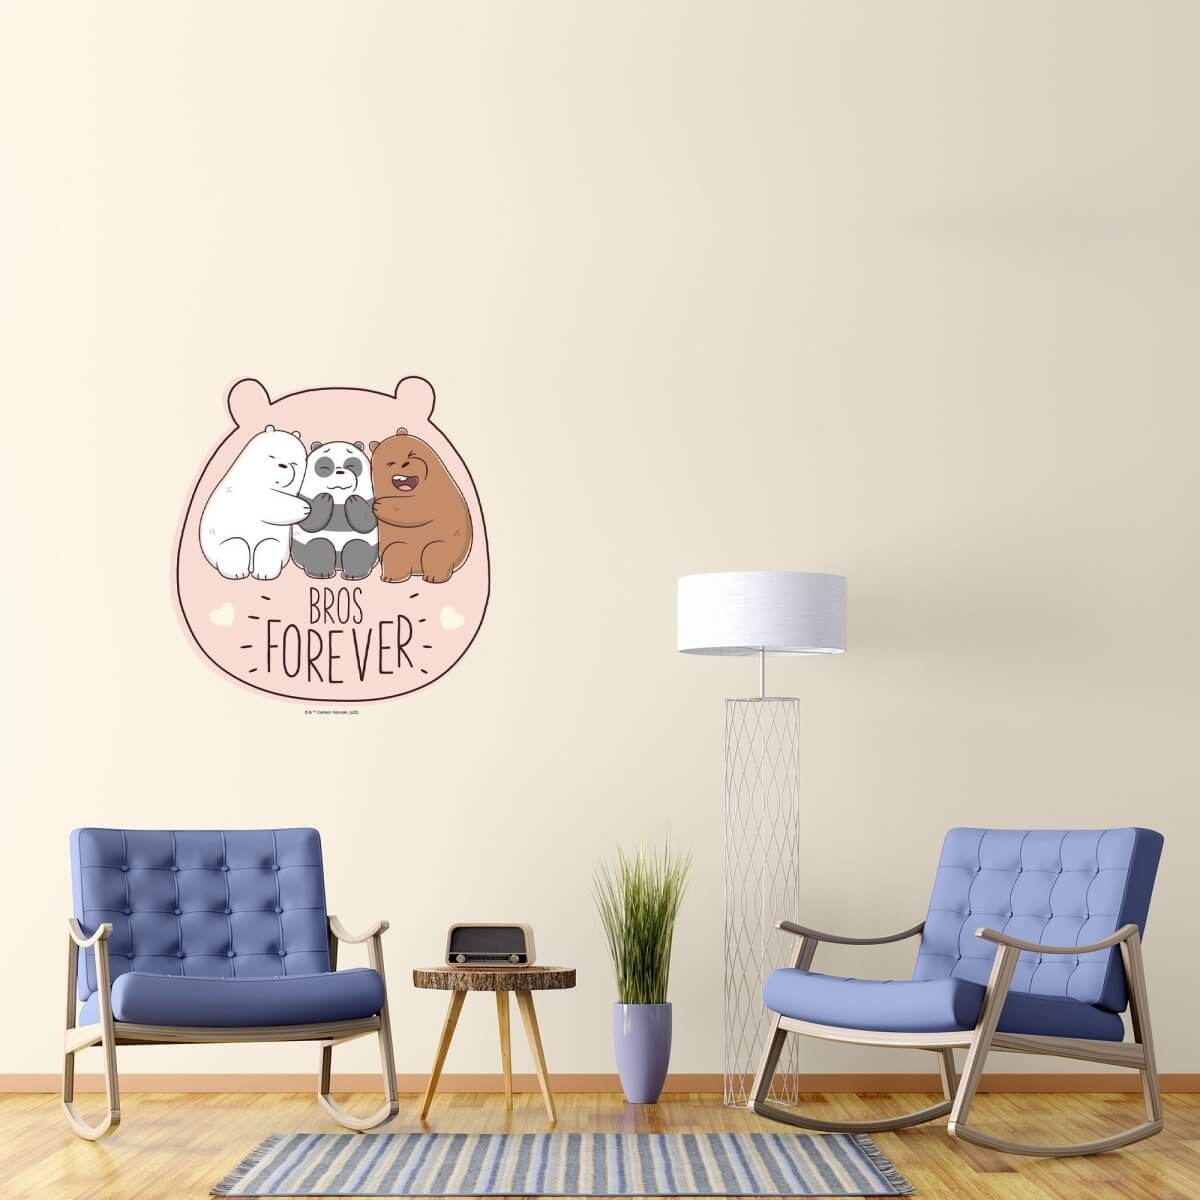 Kismet Decals Home & Room Decor We Bare Bears Bros Forever! Wall decal sticker - officially licensed - latex printed with no solvent odor - Kismet Decals